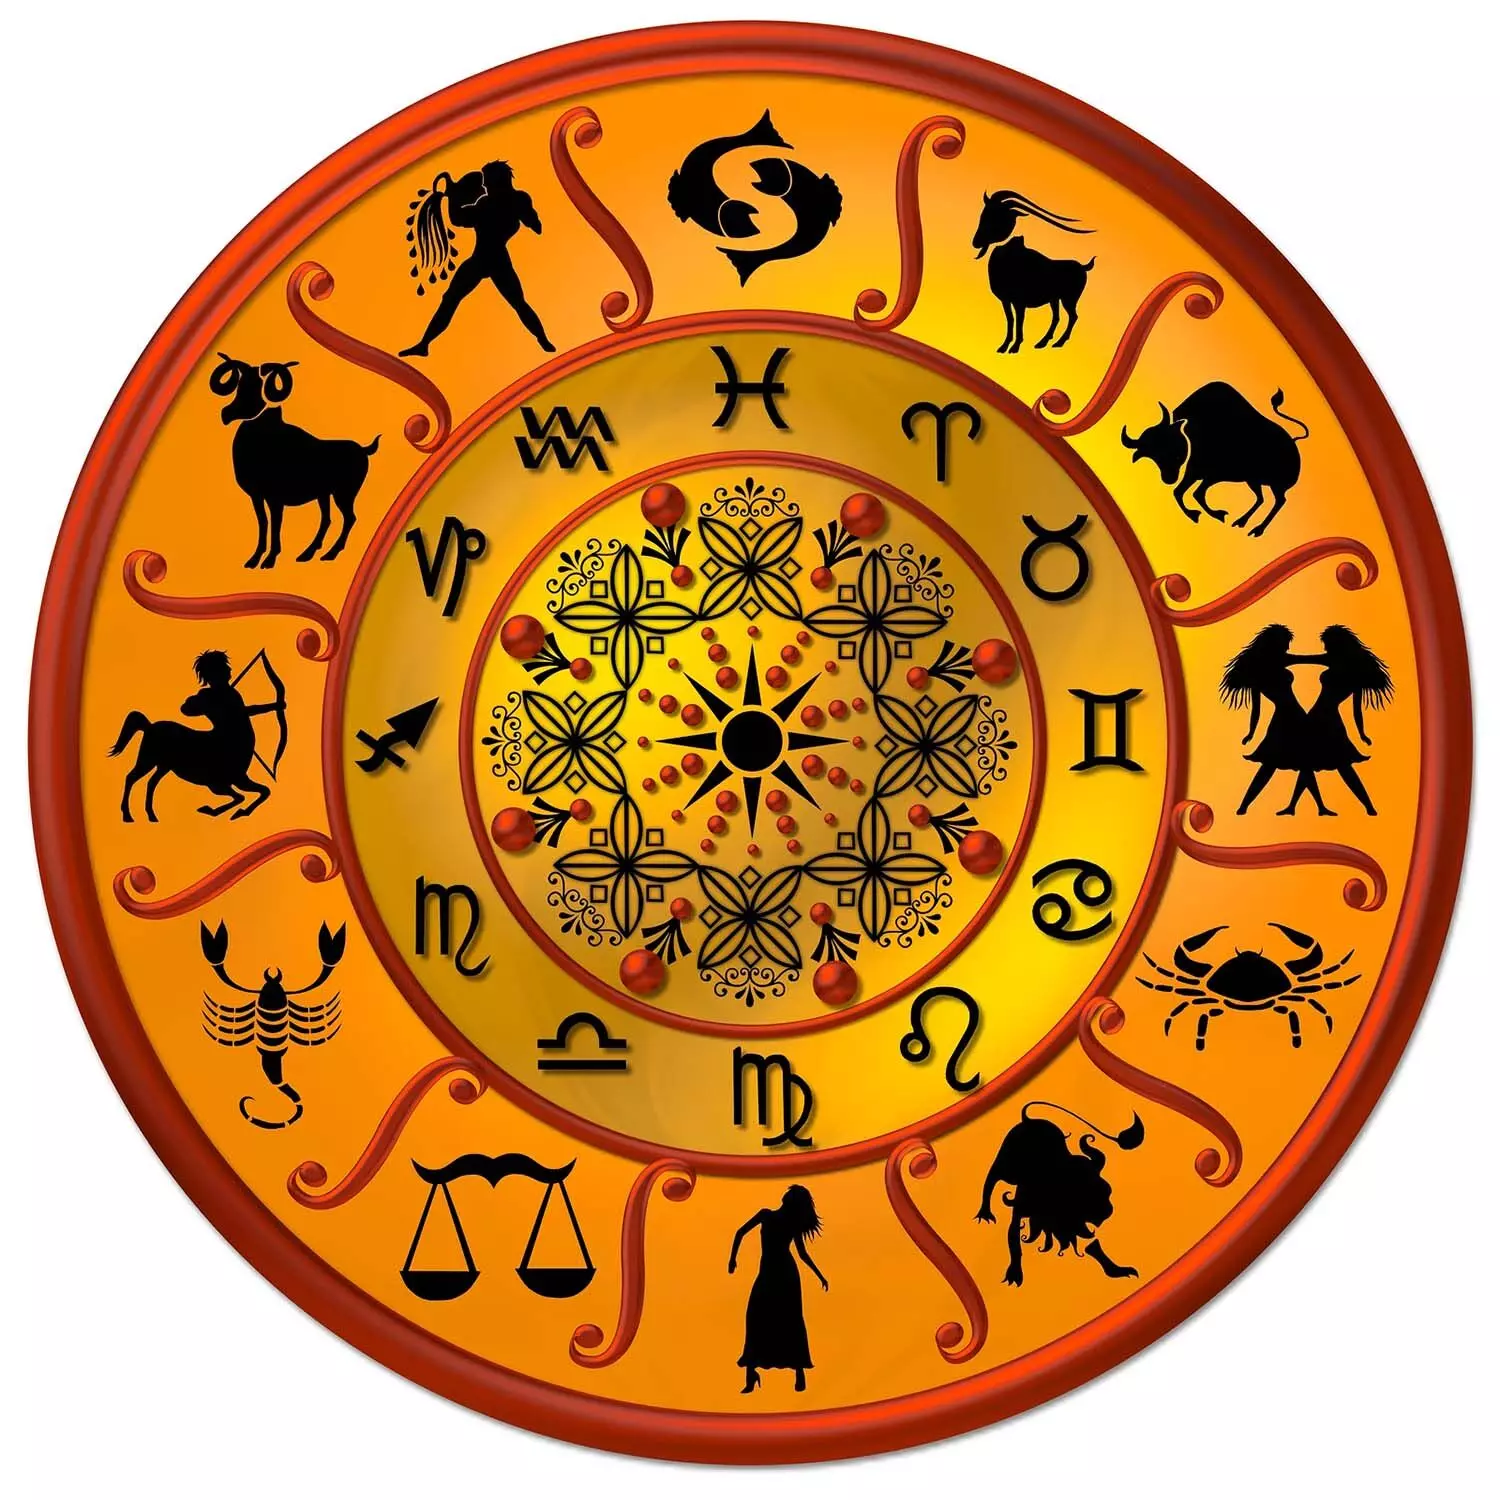 19 July – Know your todays horoscope